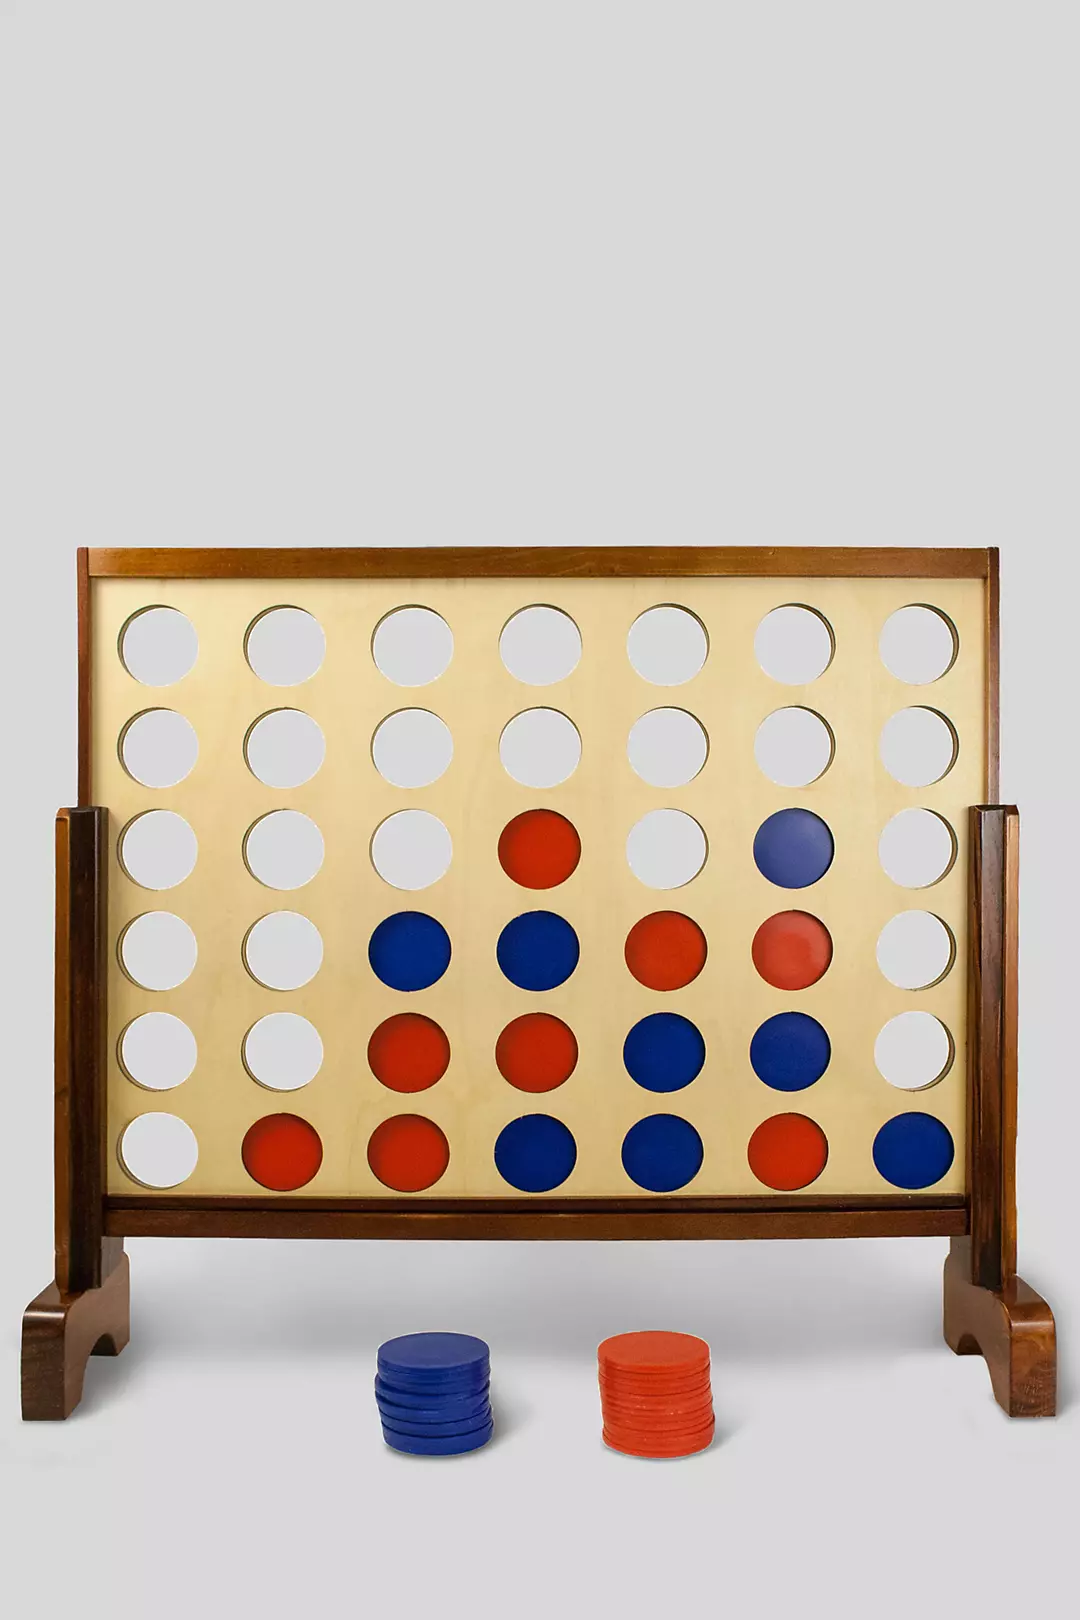 Giant Connecting Checkers Yard Game Image